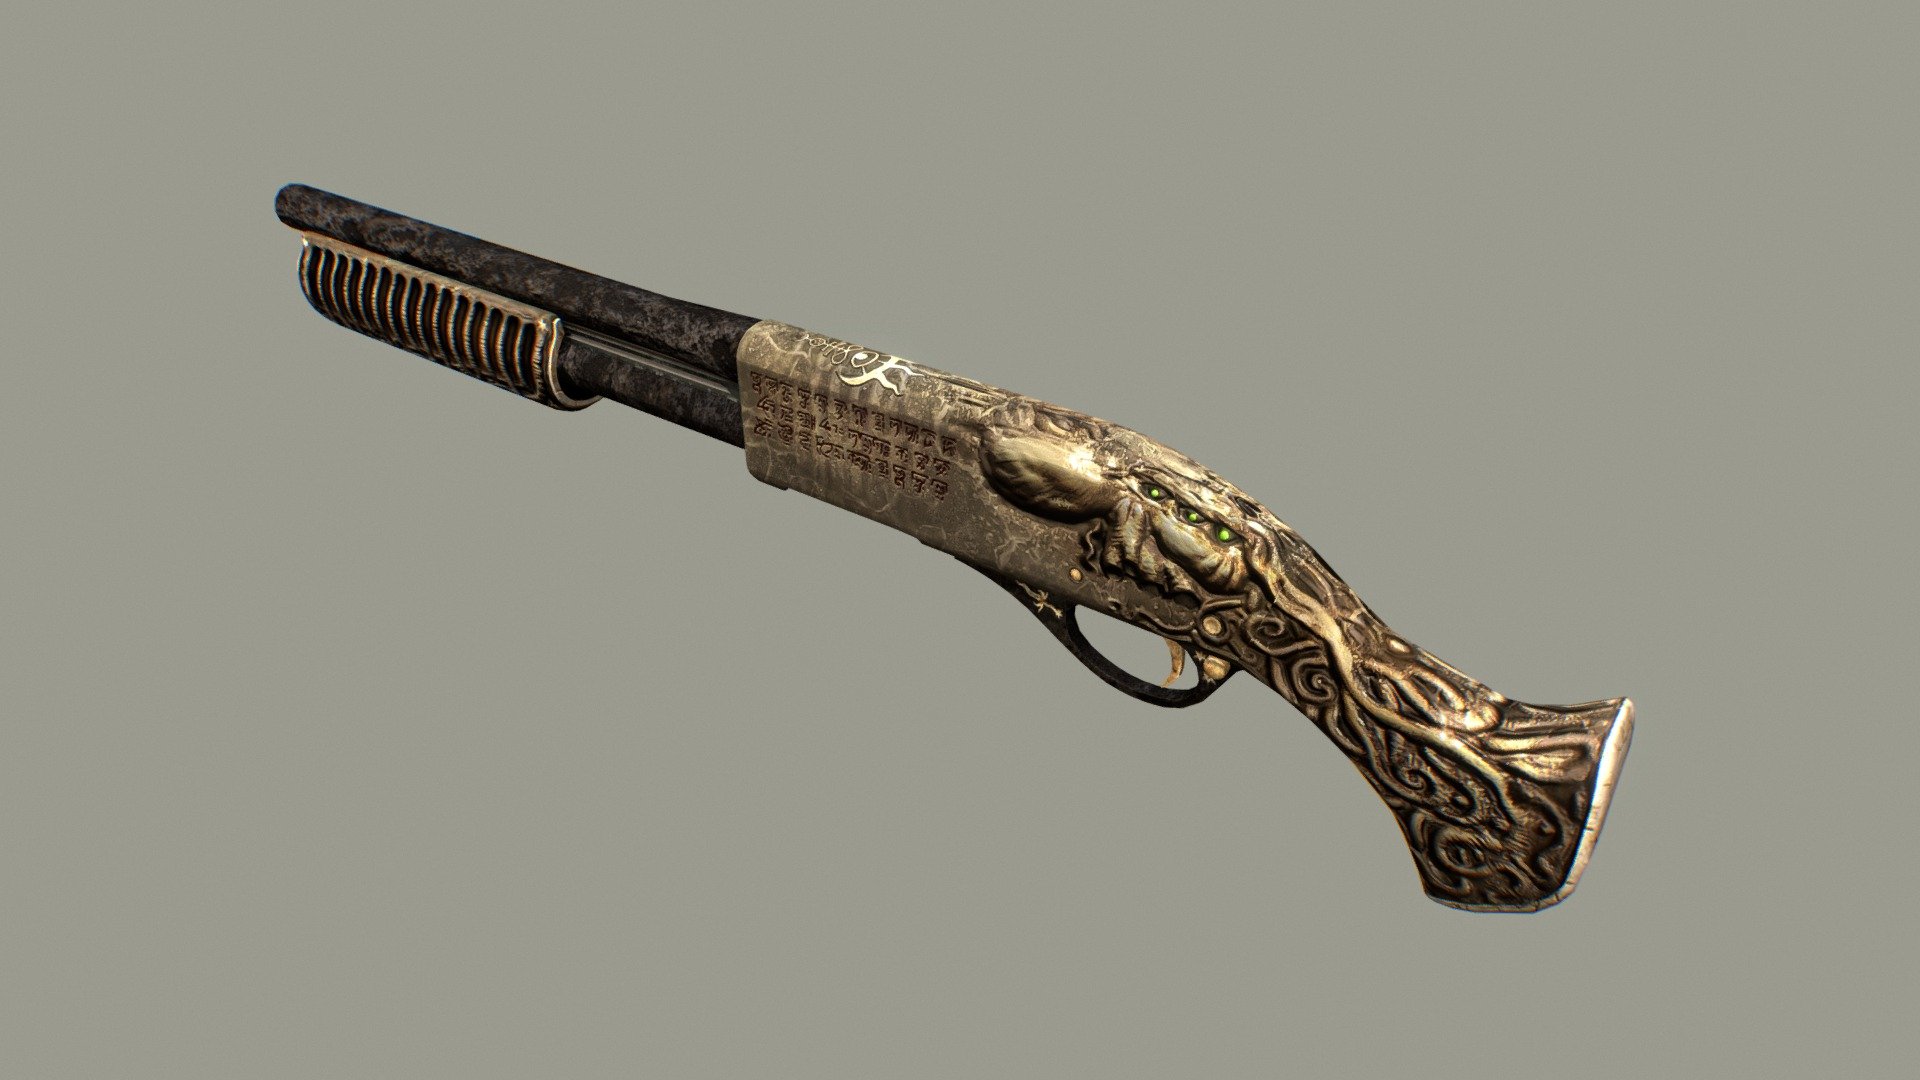 &lsquo;Cthulhu Cultists Sawed-Off Ritual Shotgun'. Made for the CS:GO $1 Million Dreams &amp; Nightmares Contest 3d model